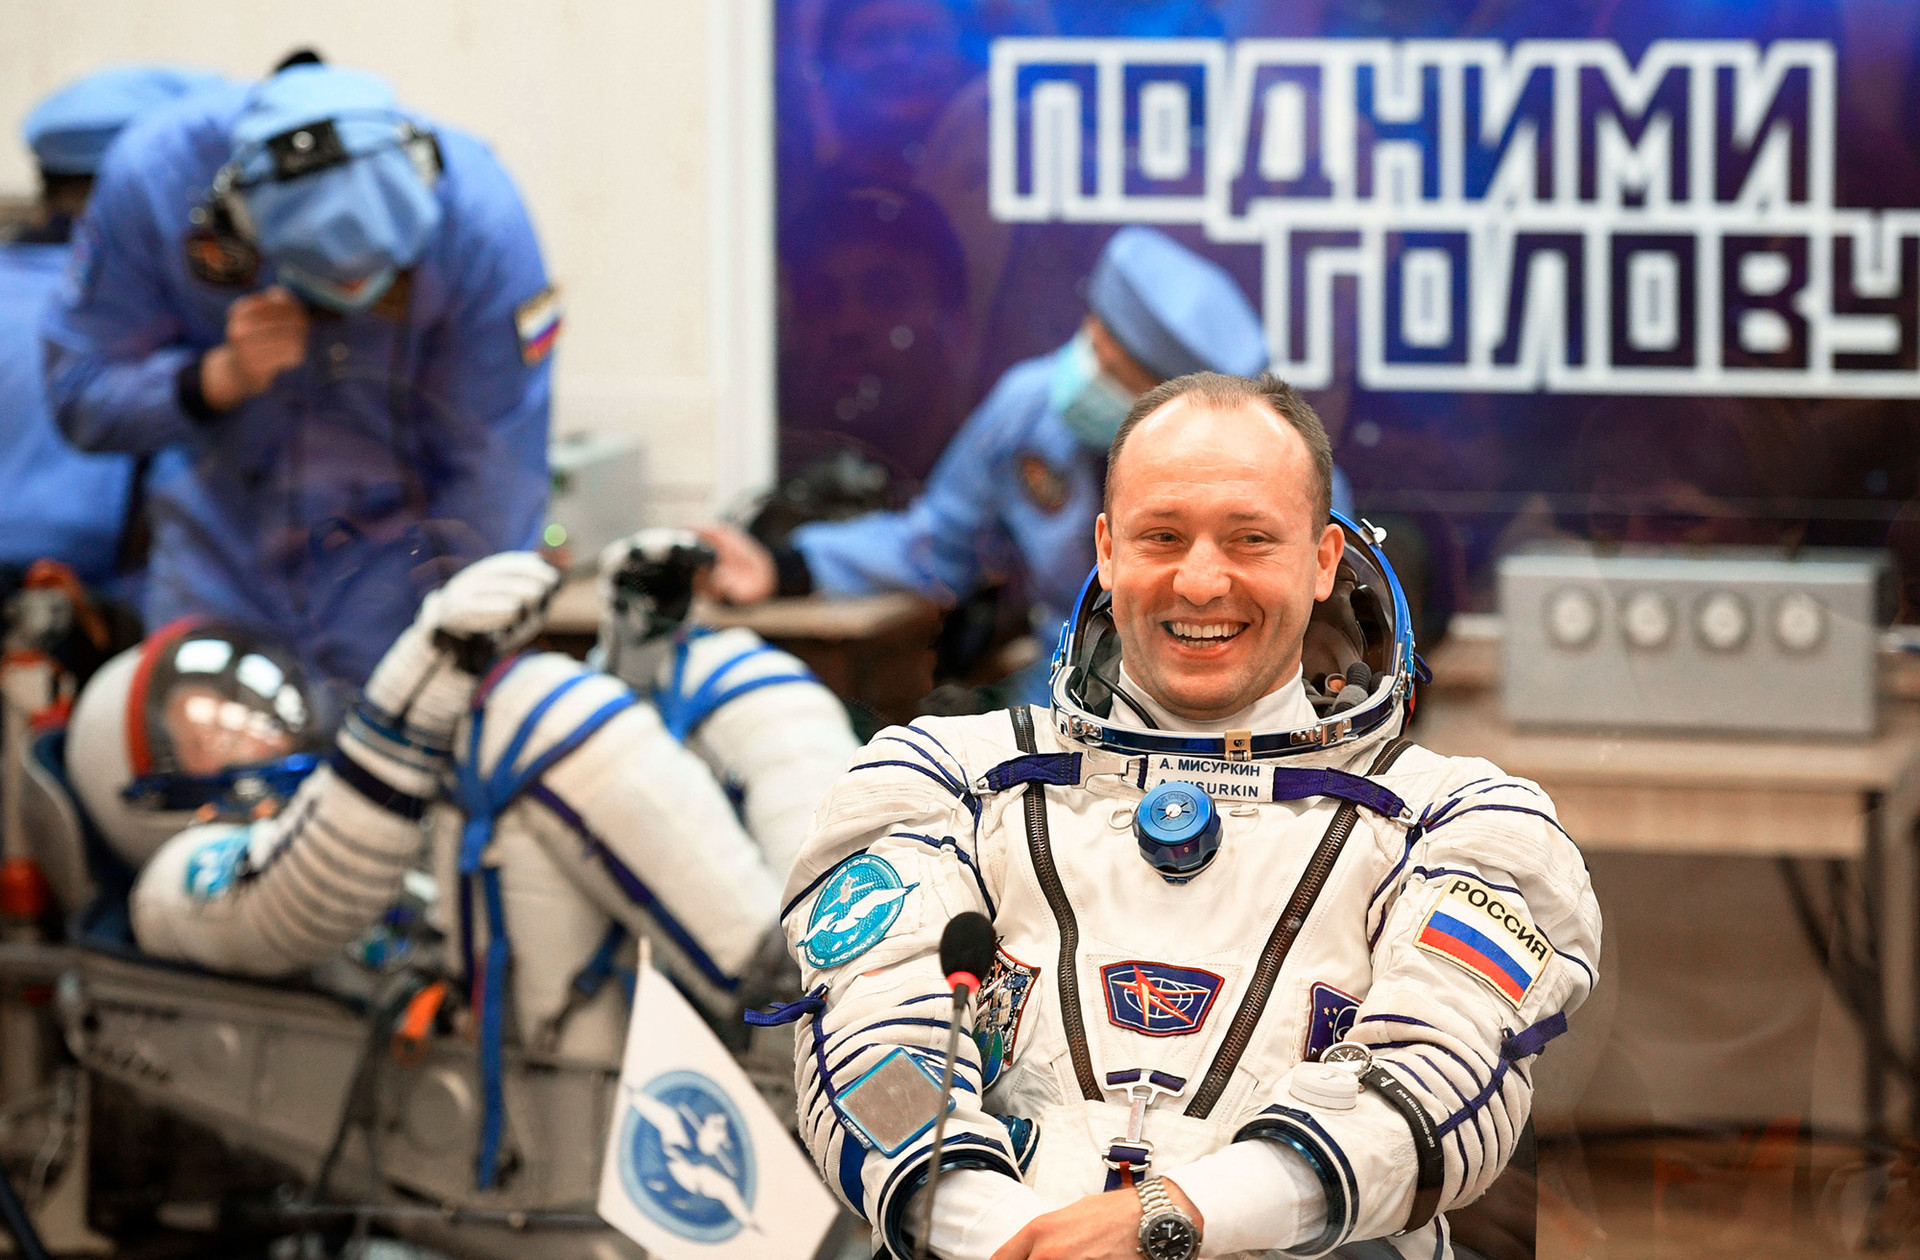 Alexander Misurkin, Roscosmos cosmonaut and member of the main crew of Expedition 53/54 to the International Space Station, before the launch of the Soyuz-FG carrier rocket with the Soyuz MS-06 manned spacecraft.